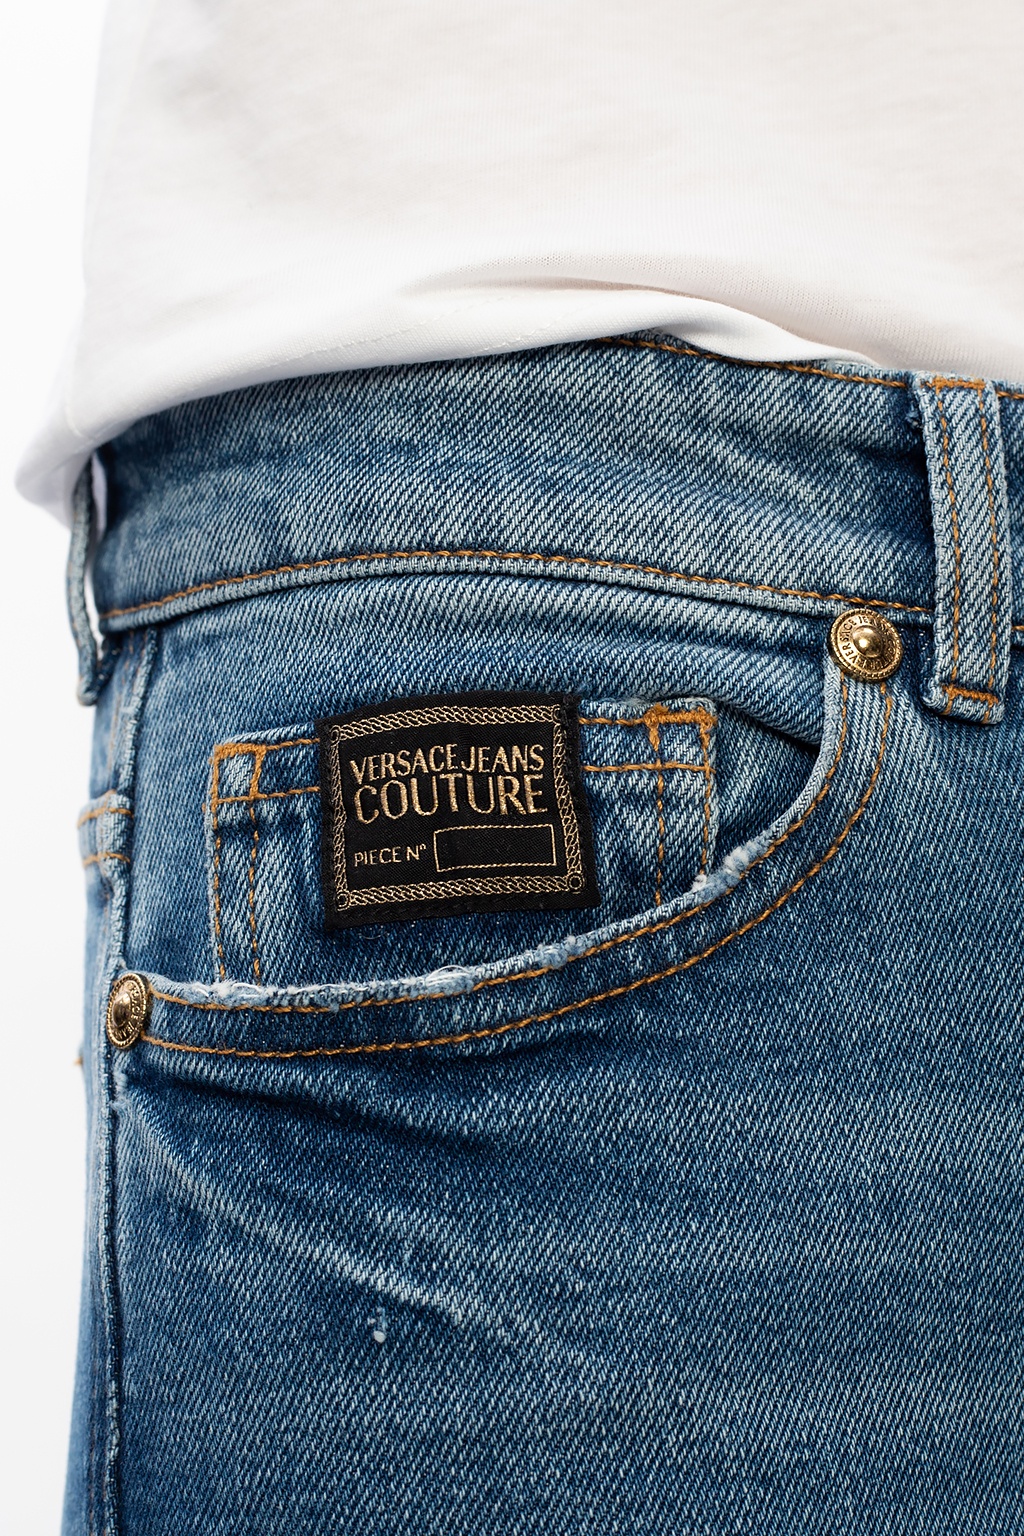 versace jeans couture jeans